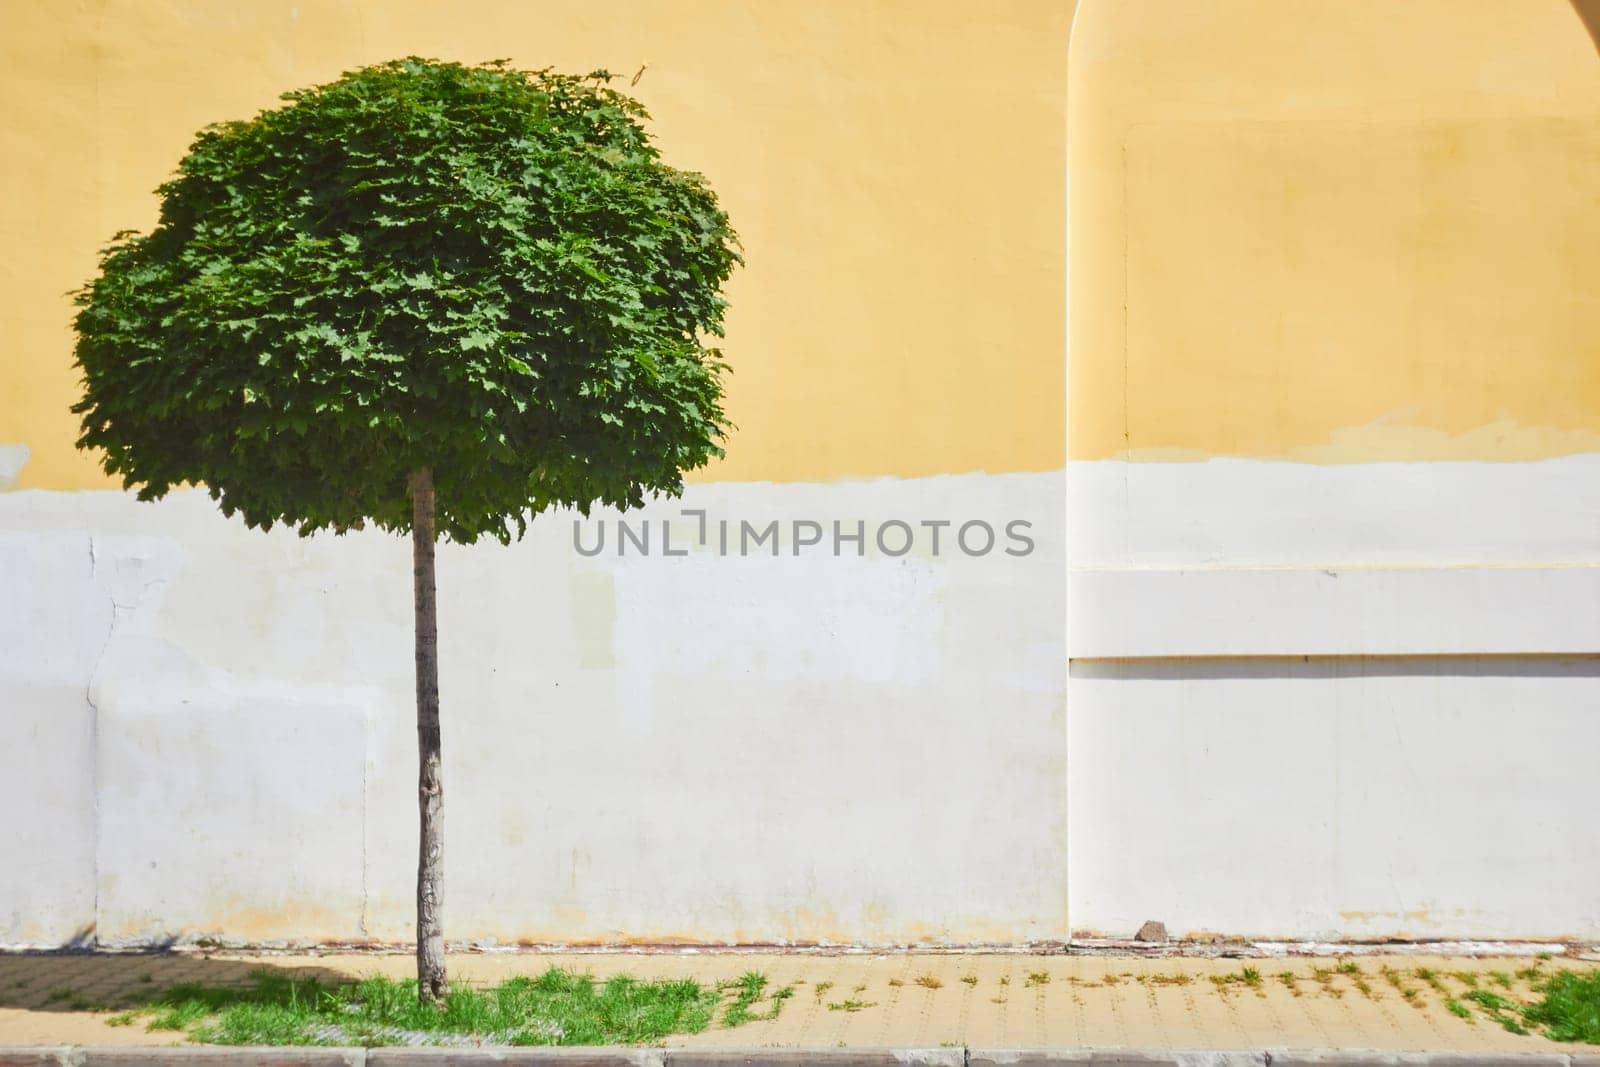 Photograph of spherical cut green tree against background of yellow wall of house. On sunny day. Tree shearing.